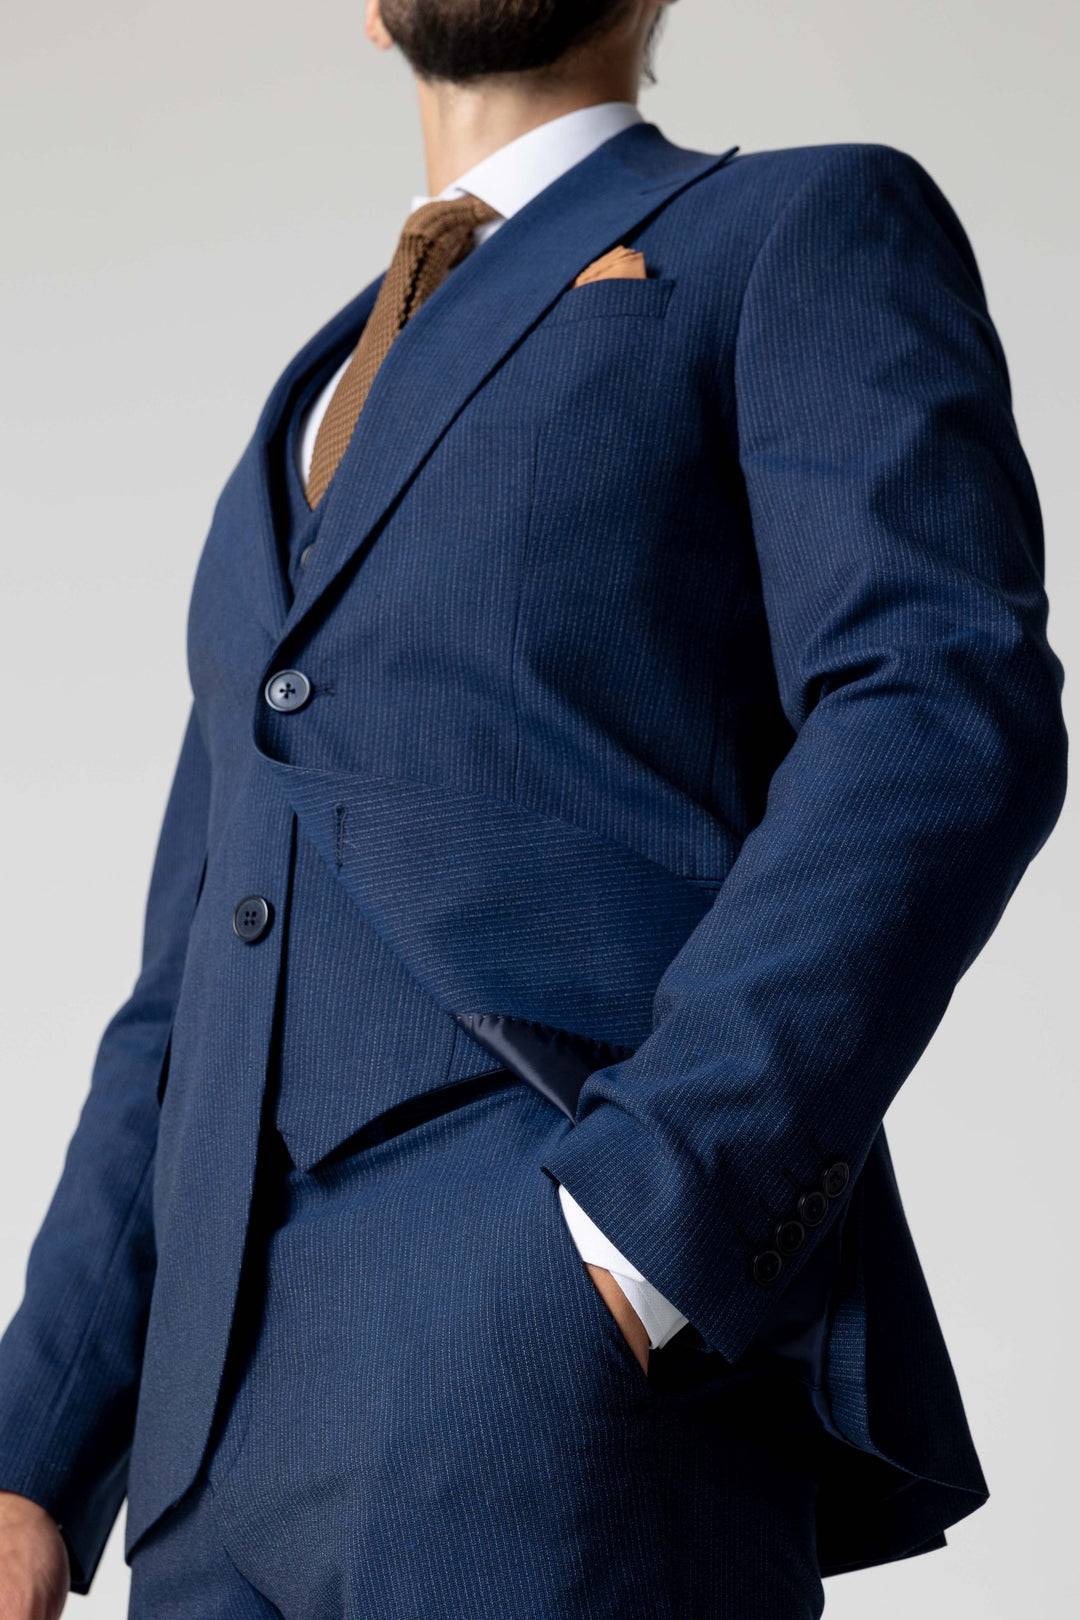 Three-piece blue suit with fine lines